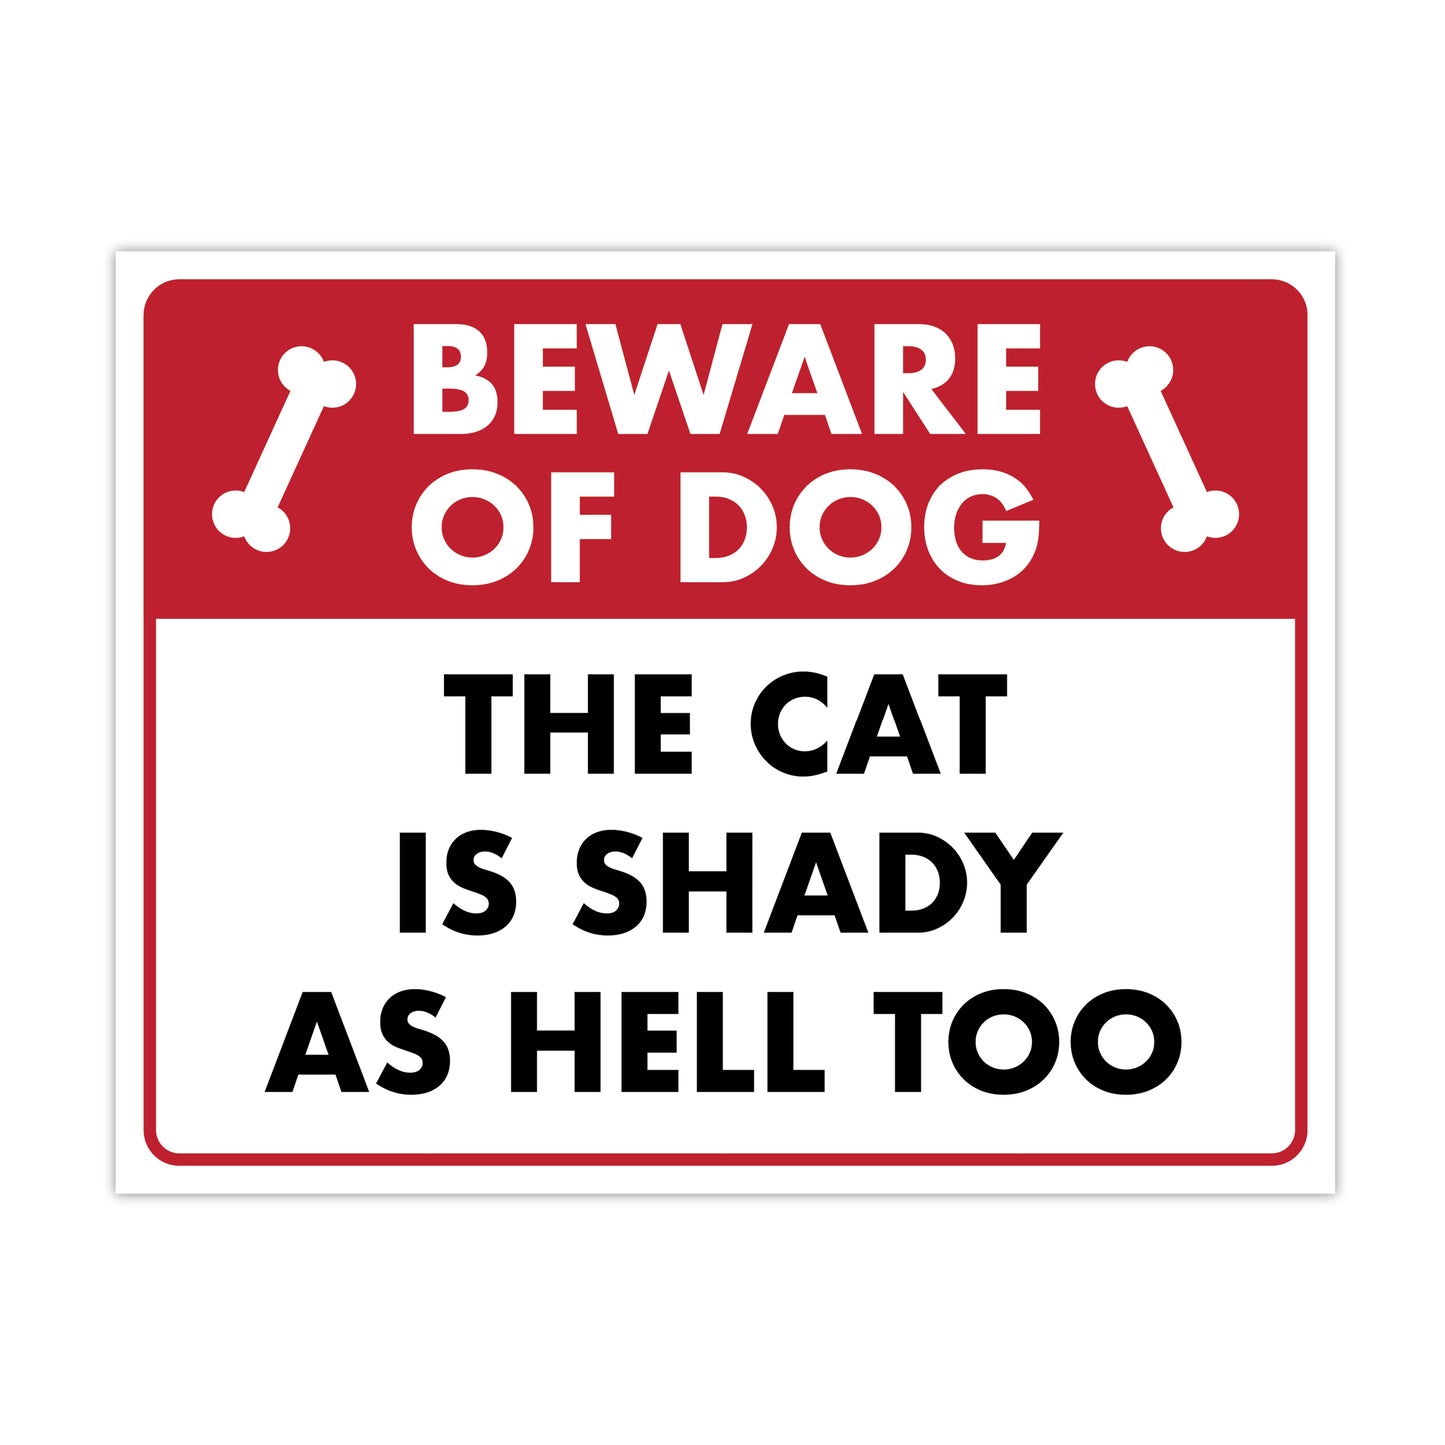 Beware of Dog - The Cat is Shady as Hell Too - 8.5" x 11" Funny Laminated Sign